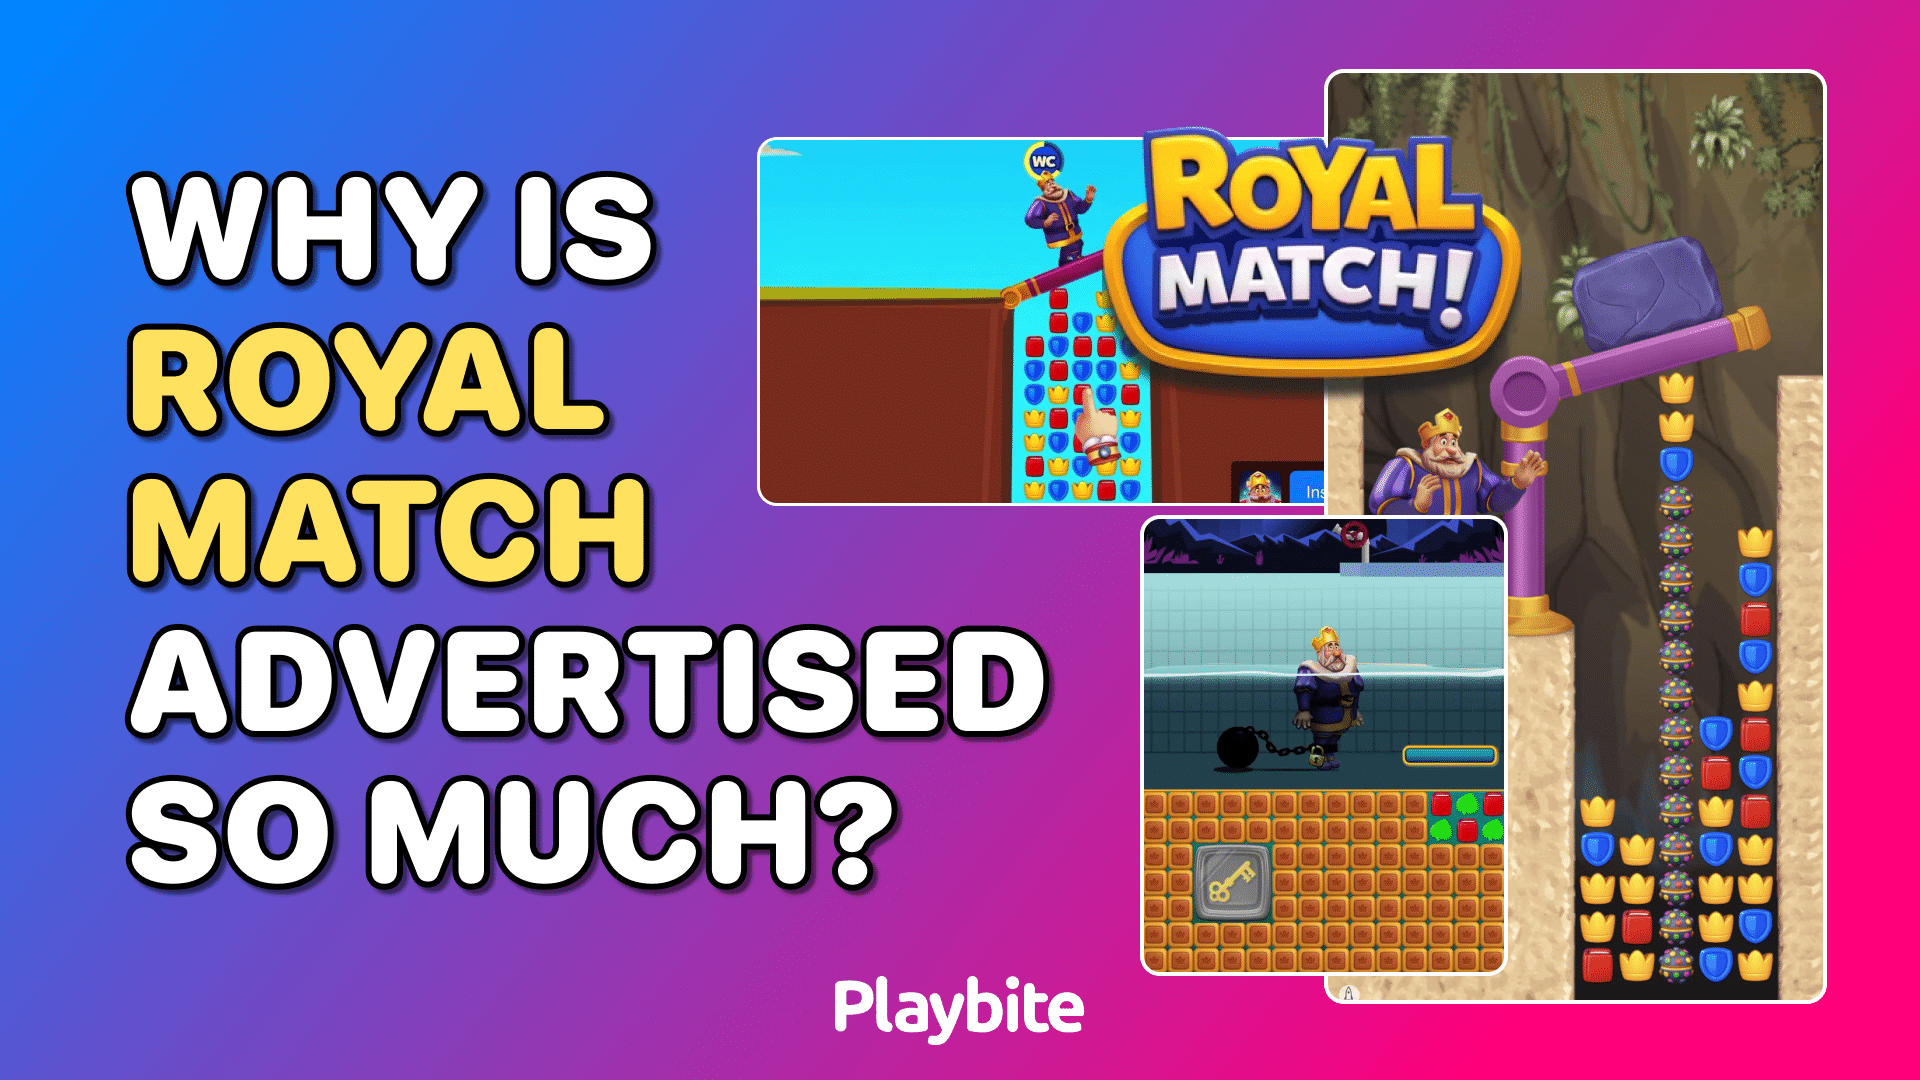 Why Is Royal Match Advertised So Much?